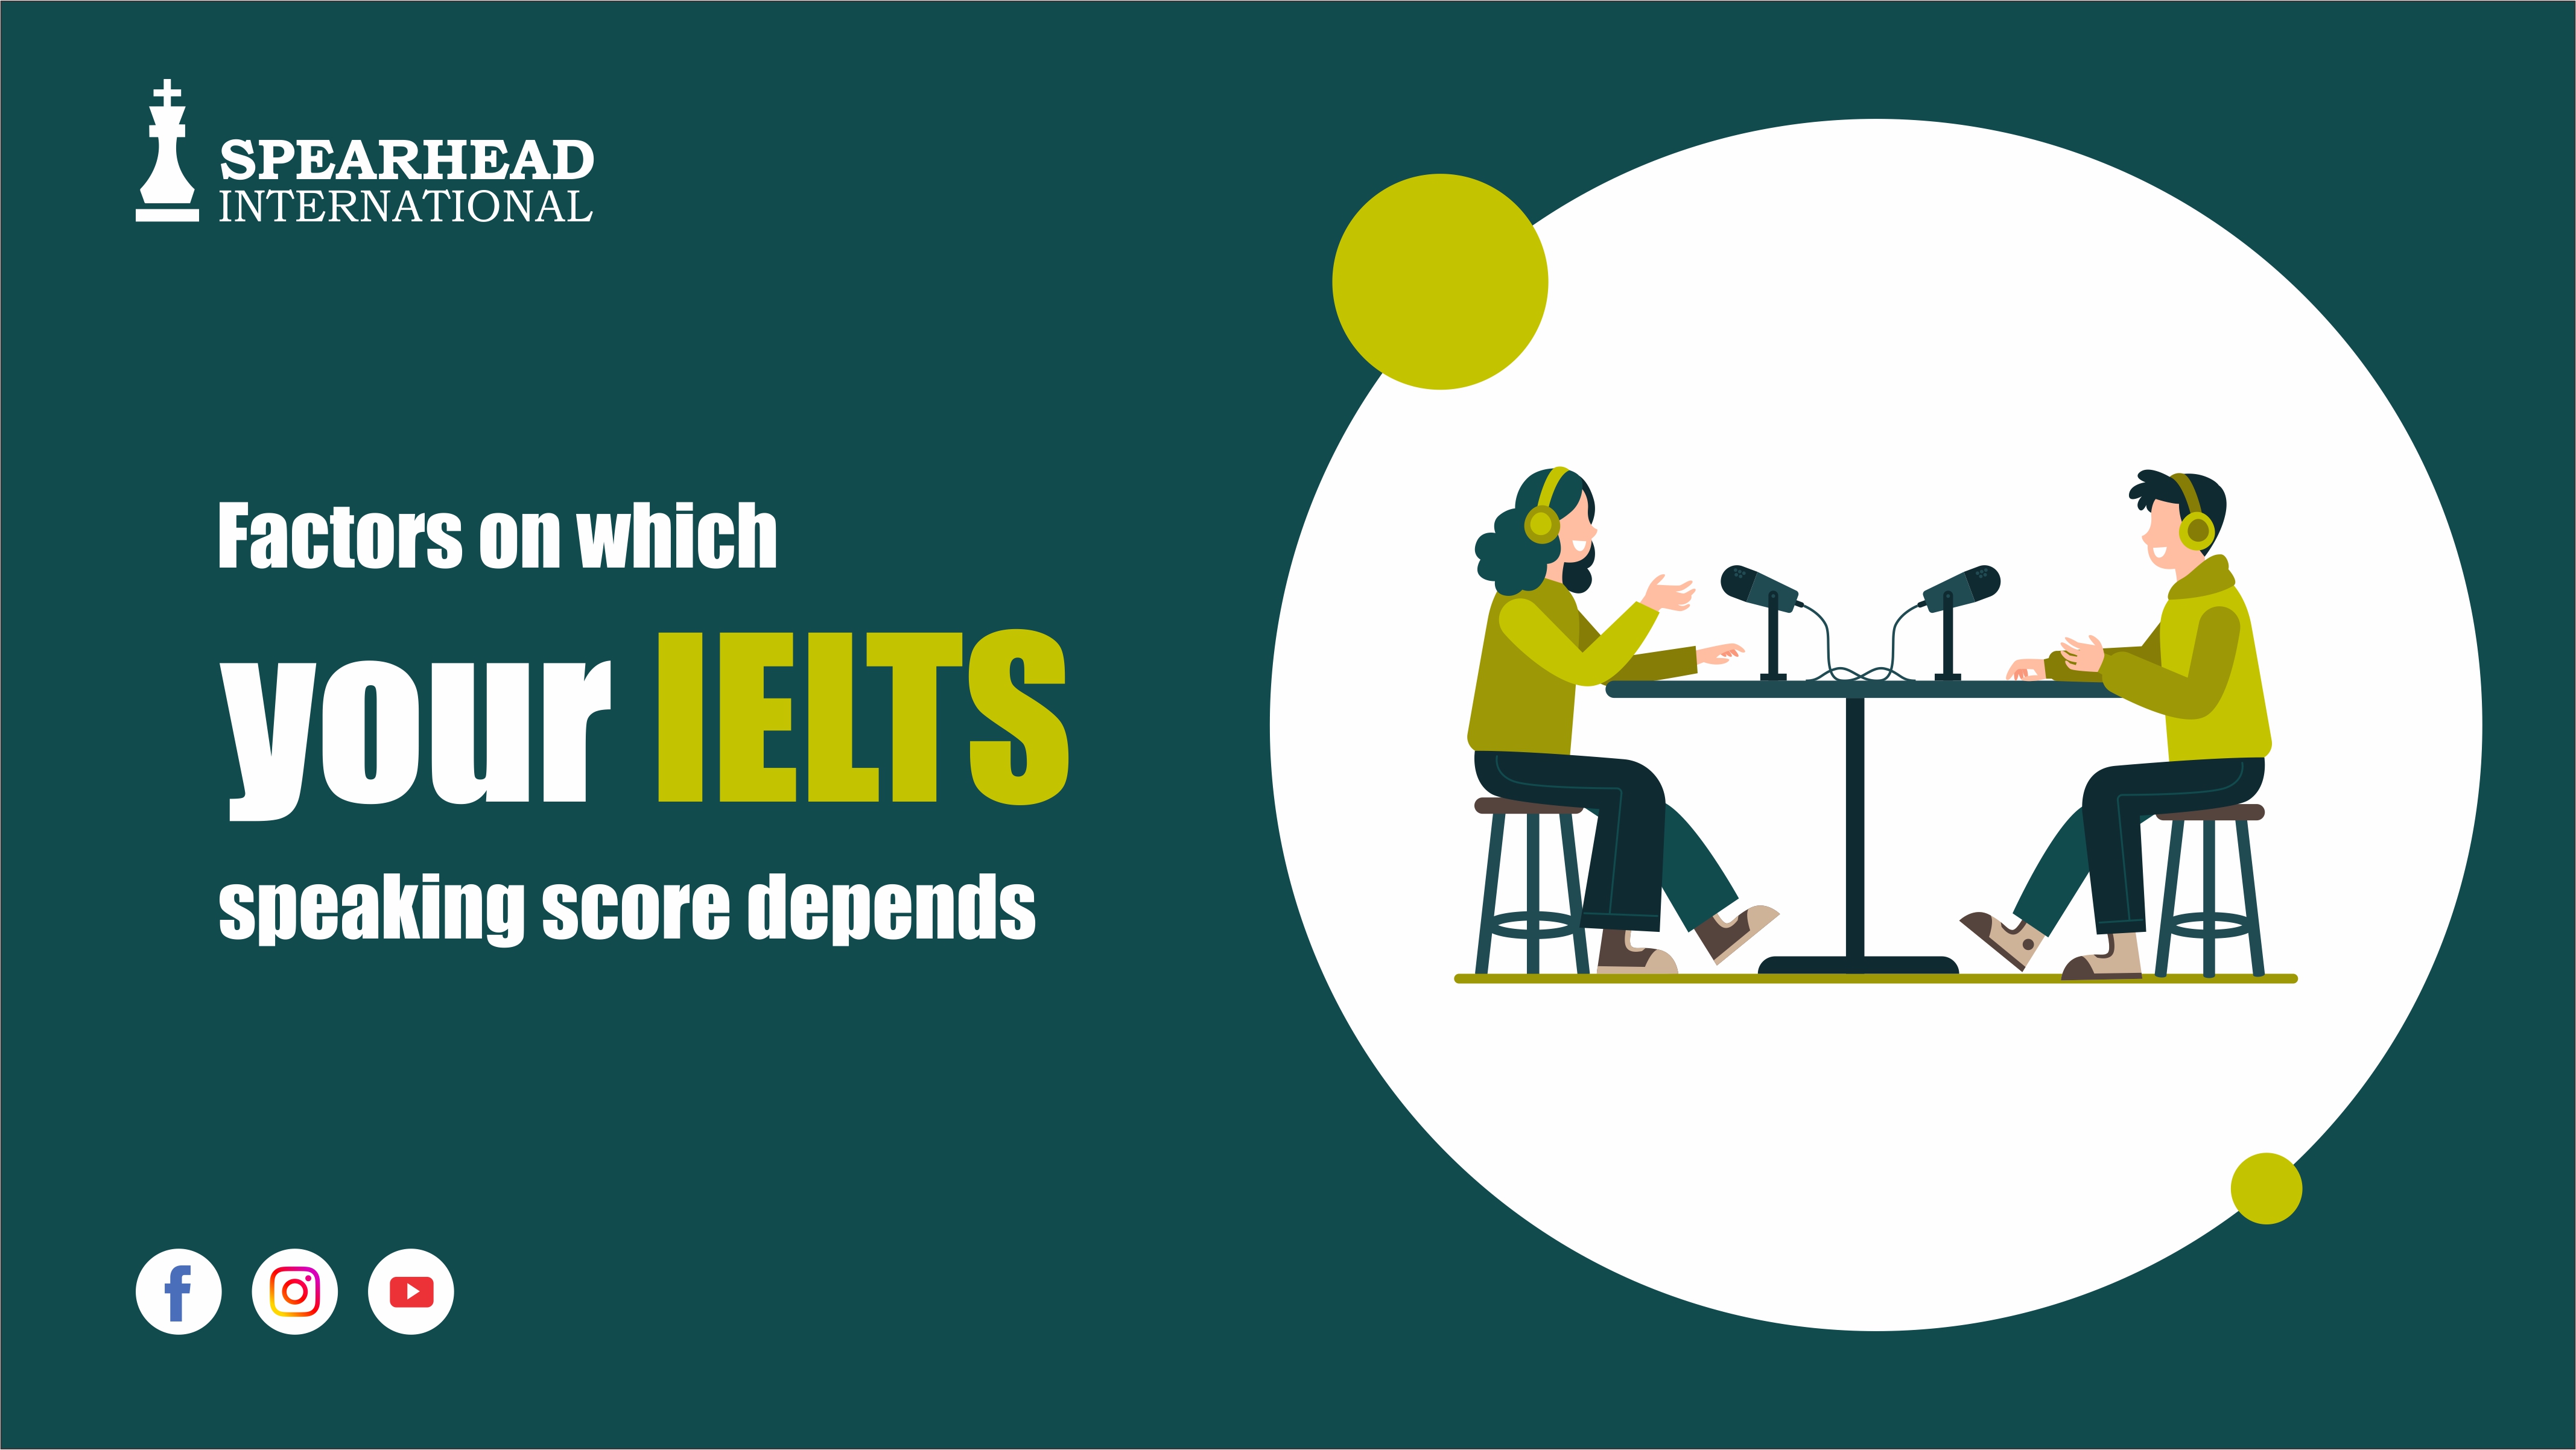 Factors on which your IELTS speaking score depends